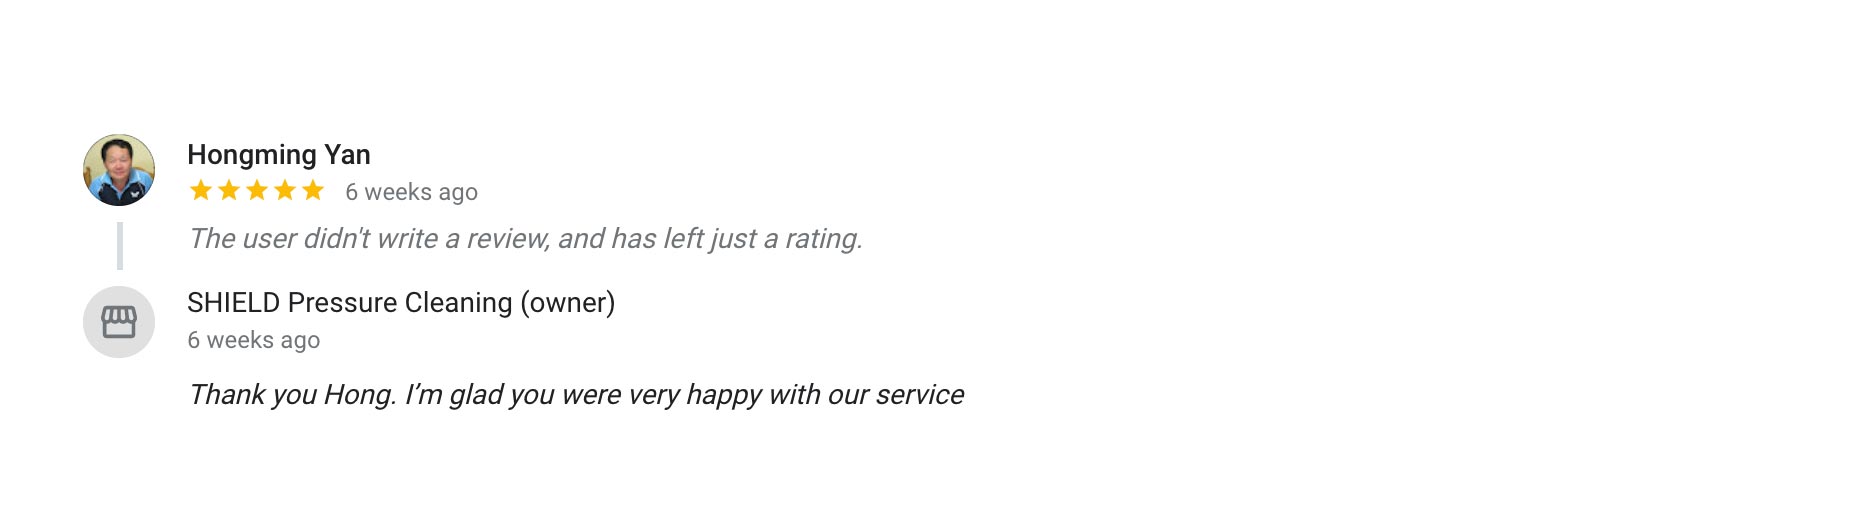 Google-review-3